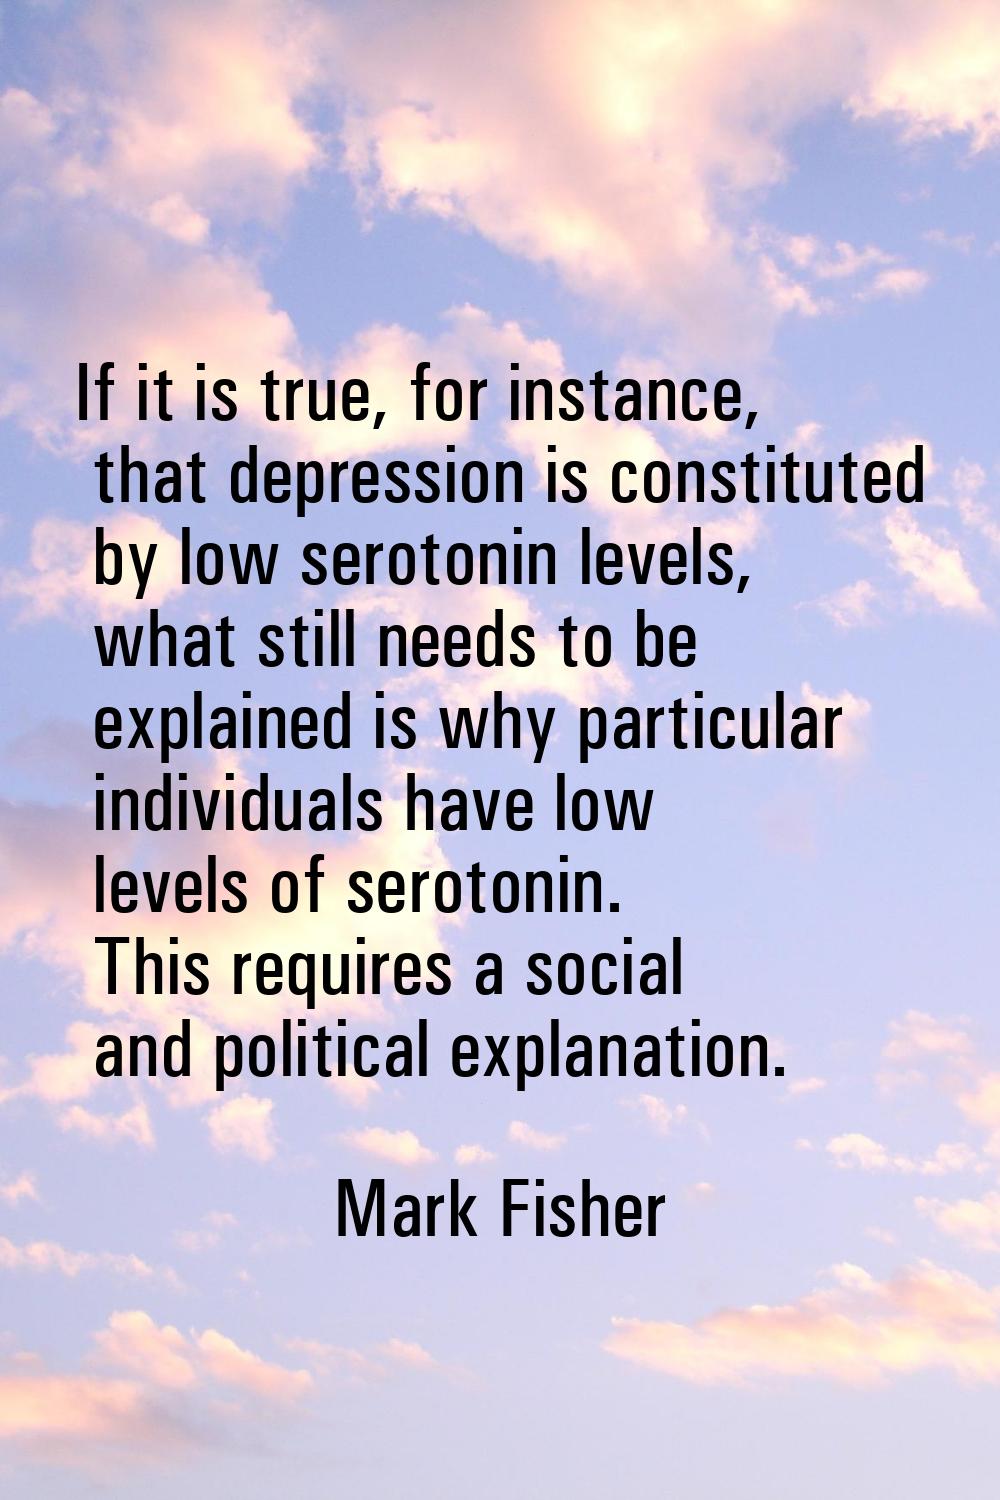 If it is true, for instance, that depression is constituted by low serotonin levels, what still nee